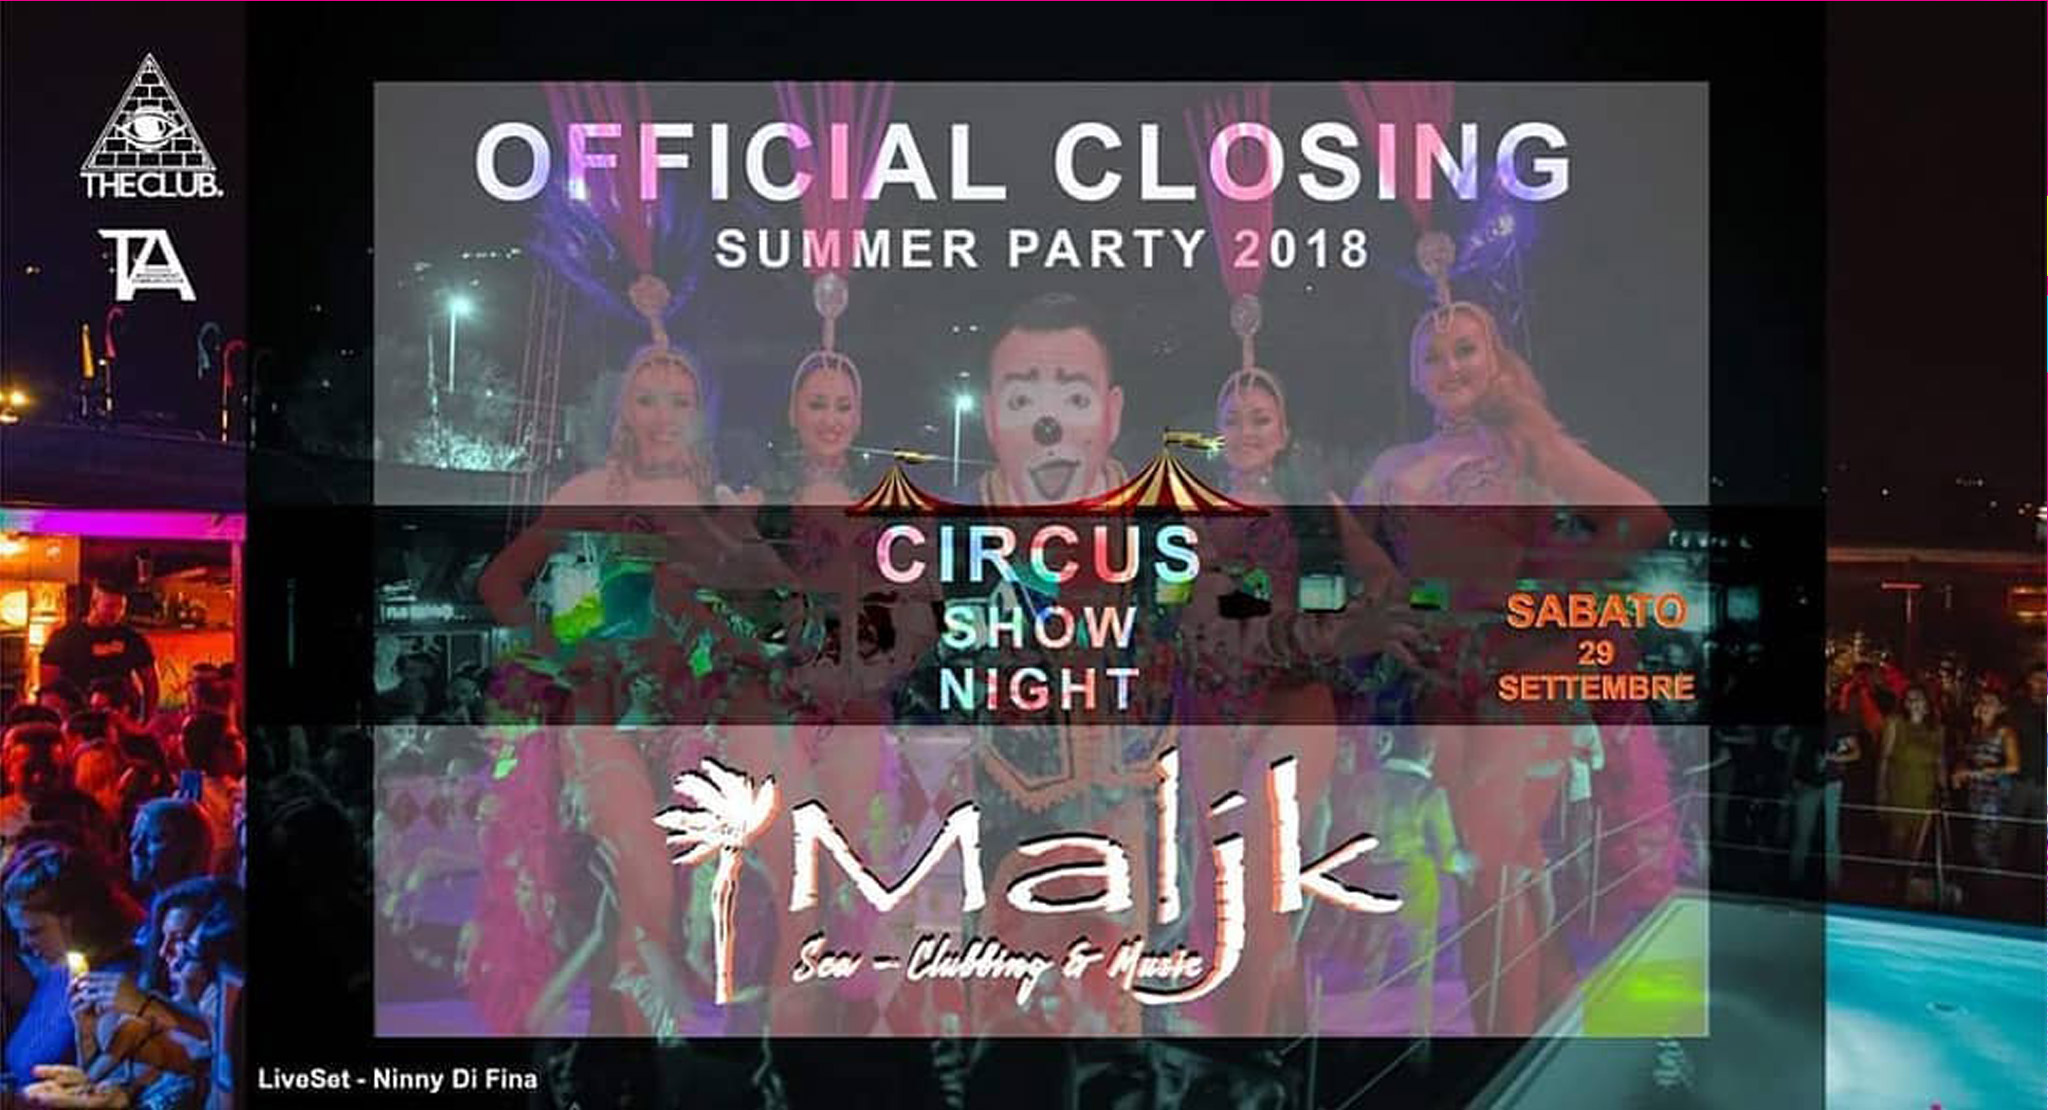 OFFICIAL CLOSING SUMMER PARTY 201